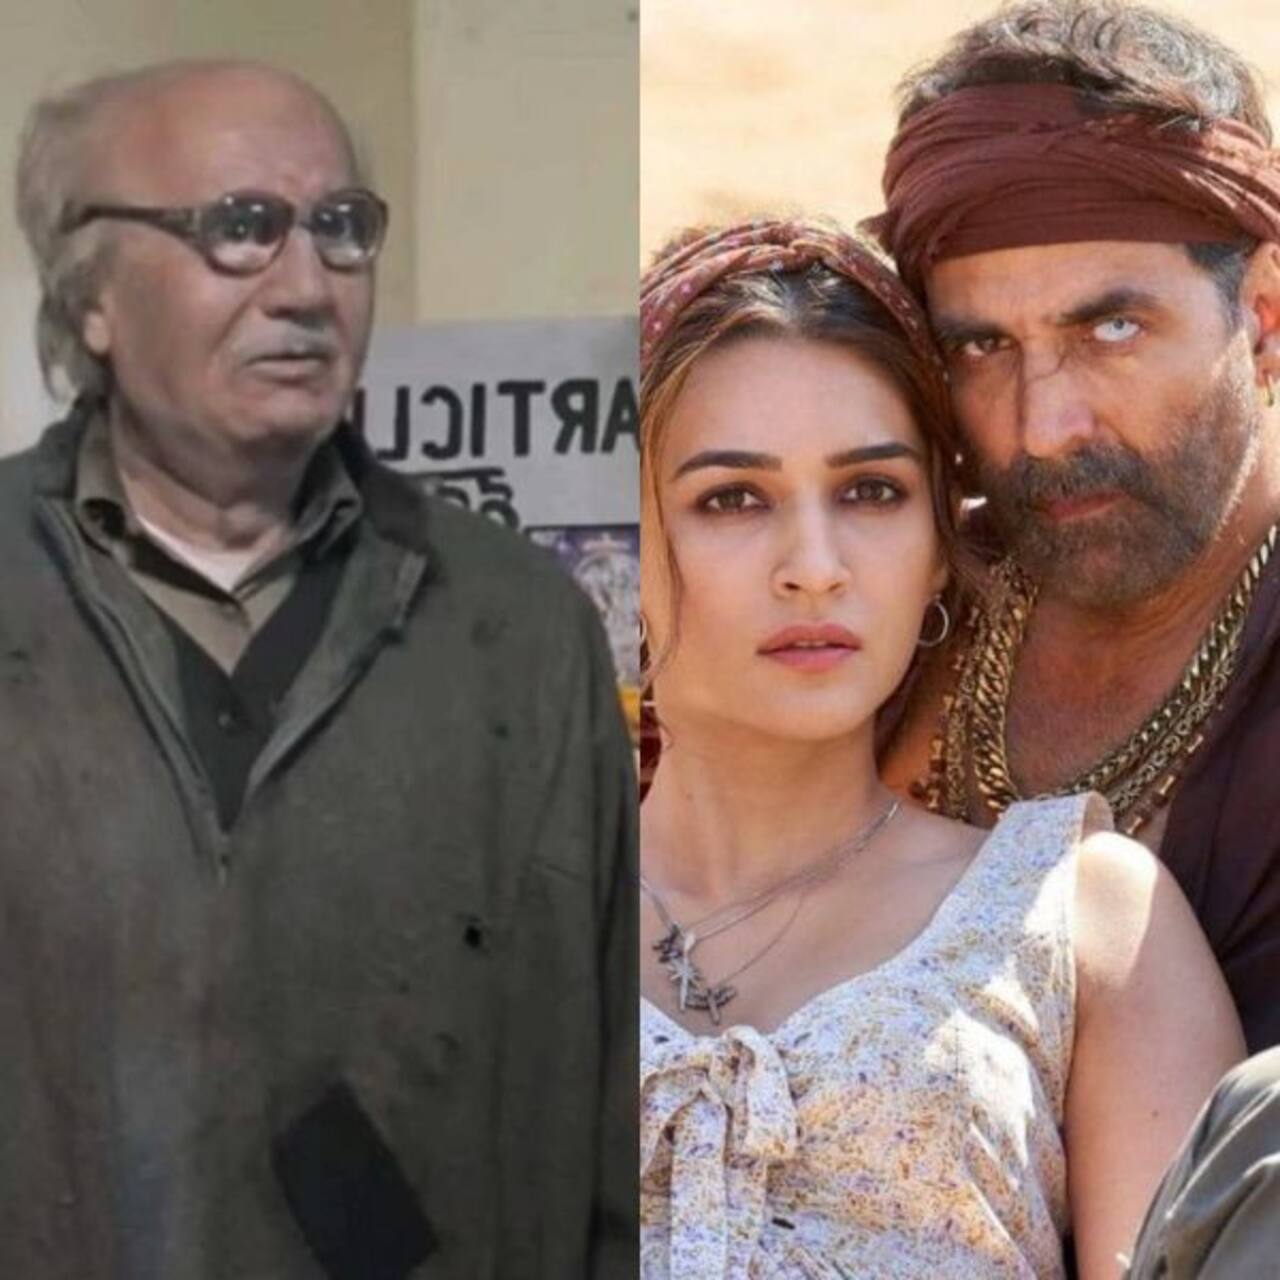 Trending Entertainment News Today: The Kashmir Files trends better than Baahubali 2, Bachchhan Paandey drops at the box office and more